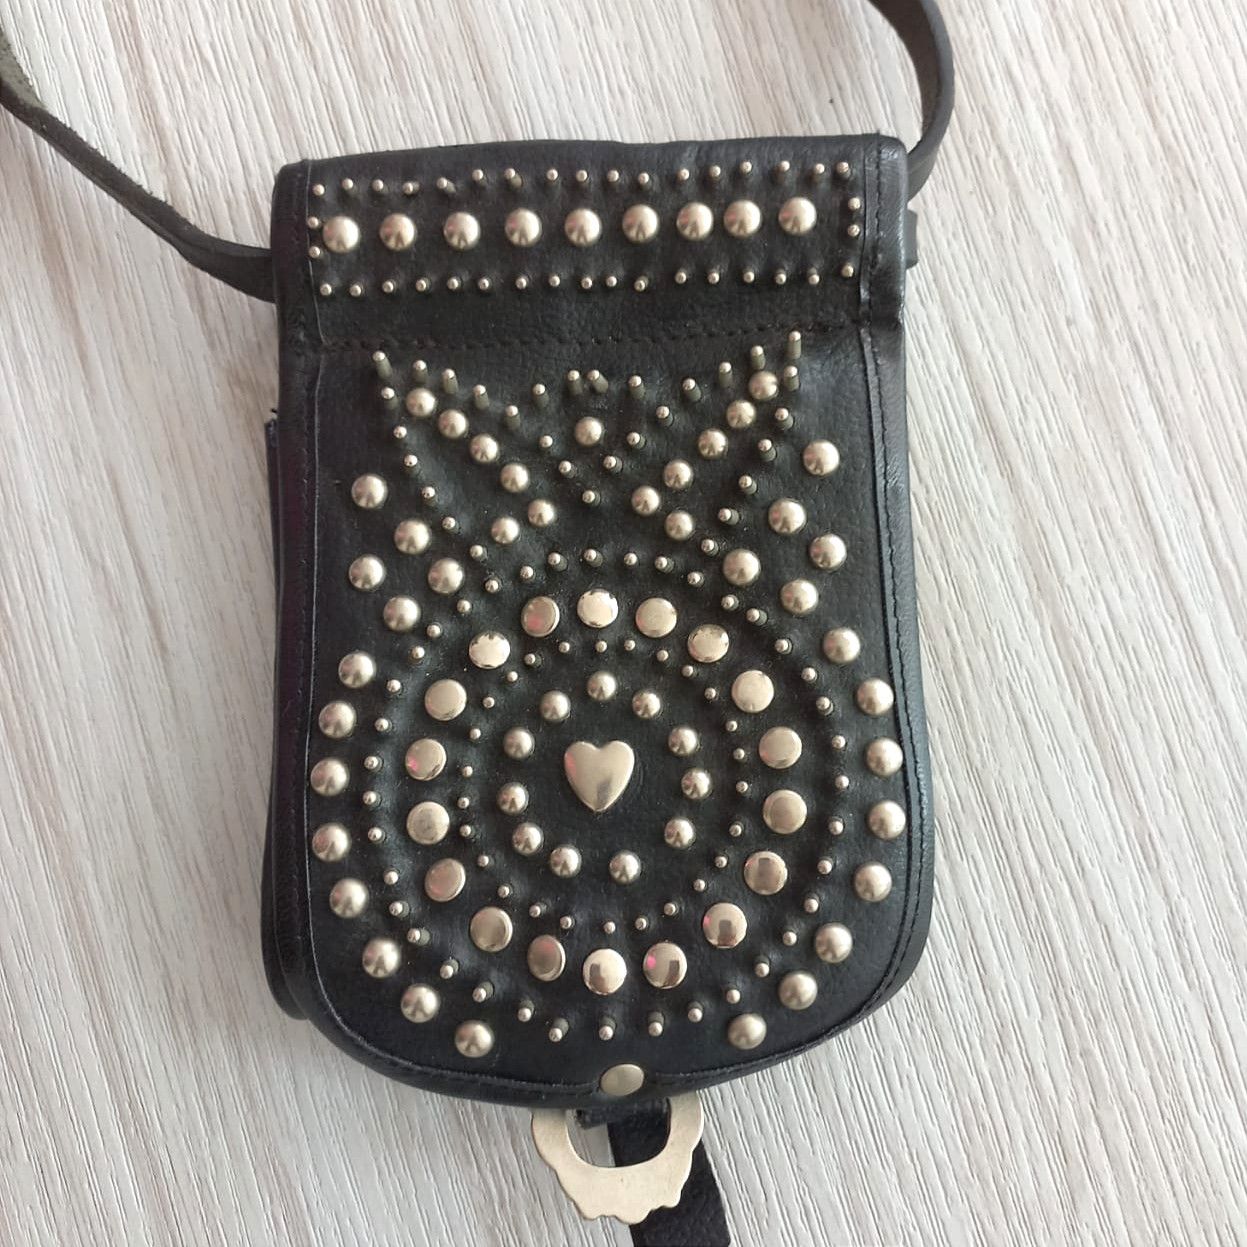 Vintage ABACO Studded Crossbody Leather Pouch Bag - 5